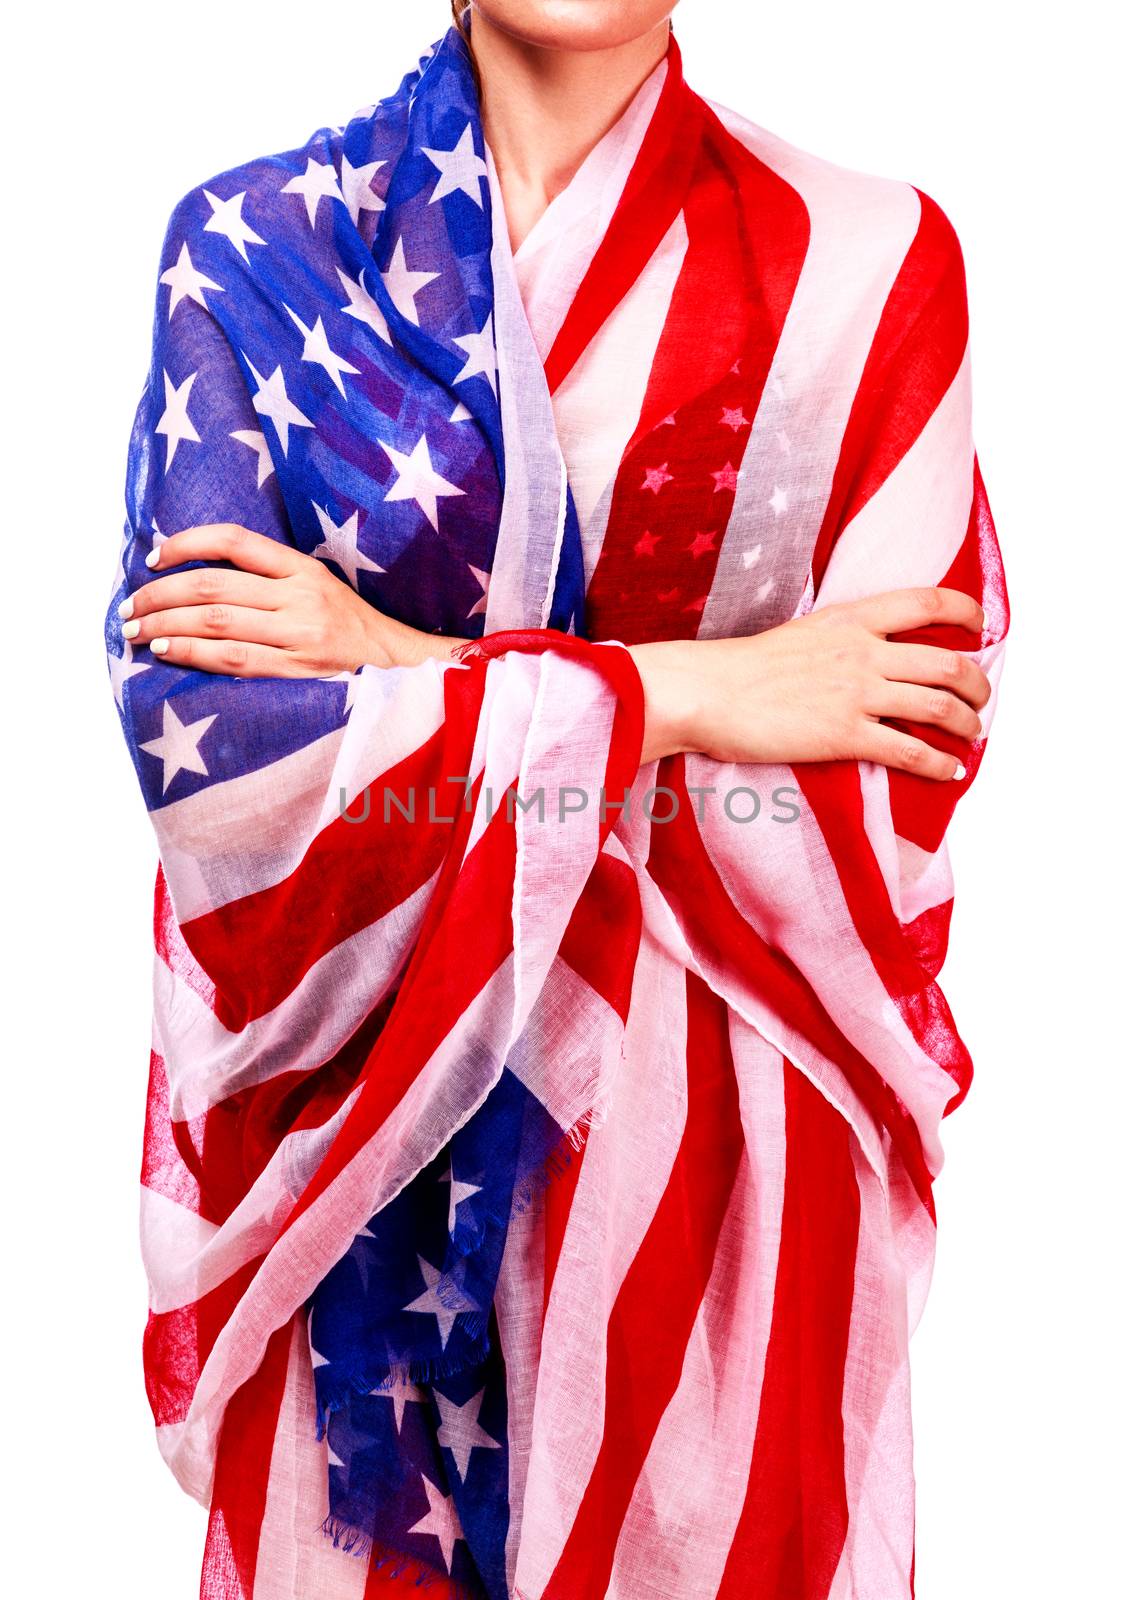 Woman's body wrapped in the USA national flag, isolated on white by Nobilior